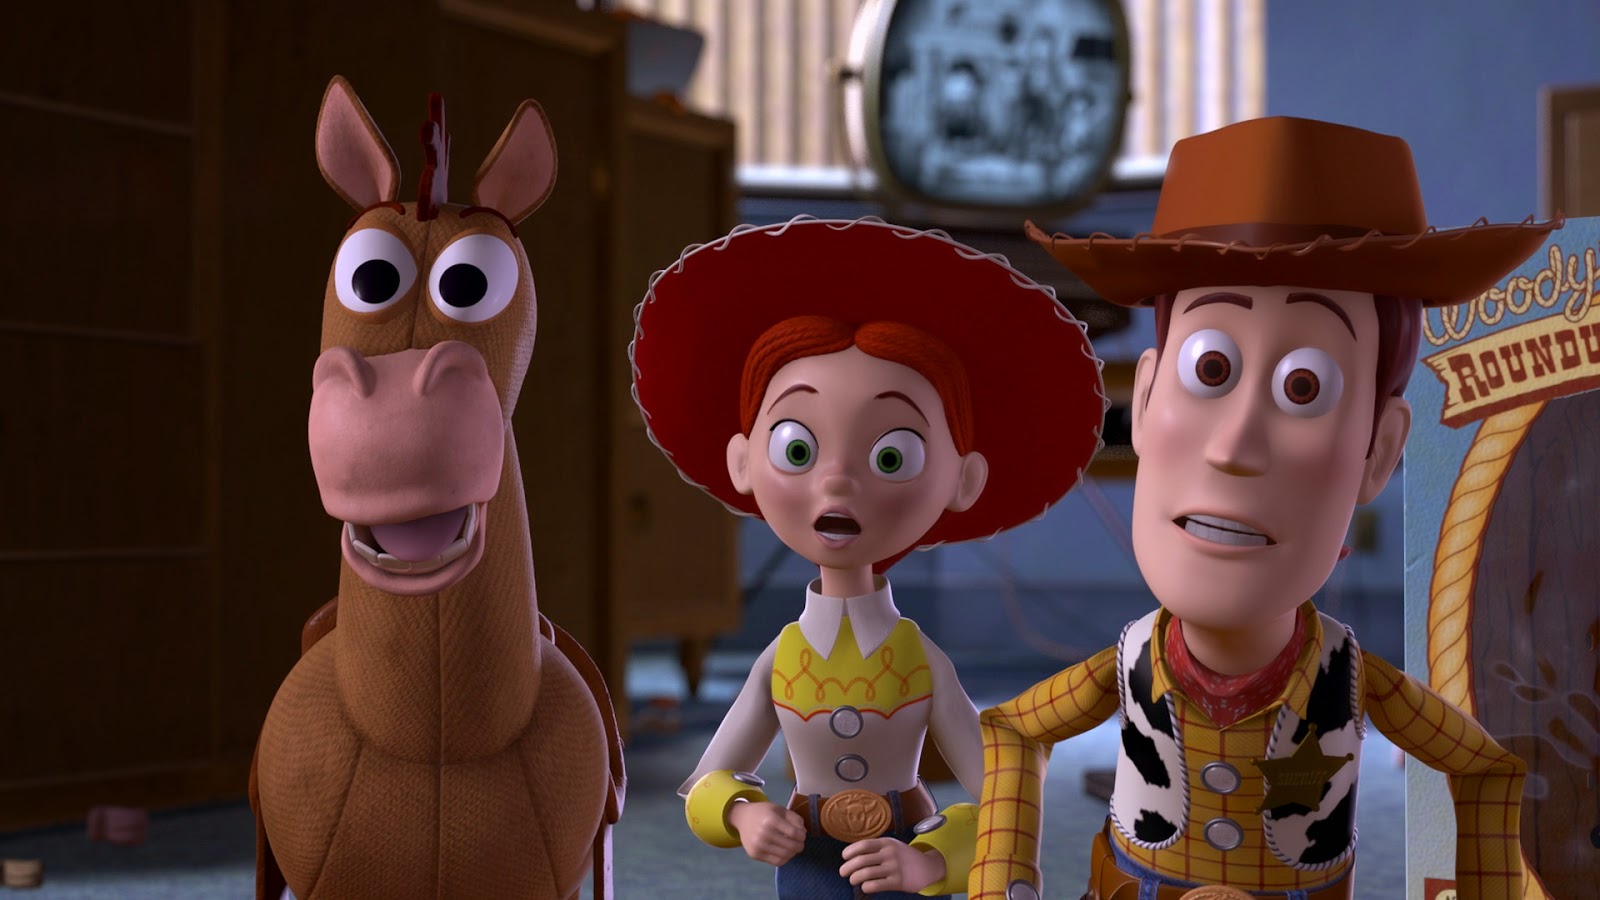 A Look At Disney A Look At Disney Opens The Toy Box Toy Story 2